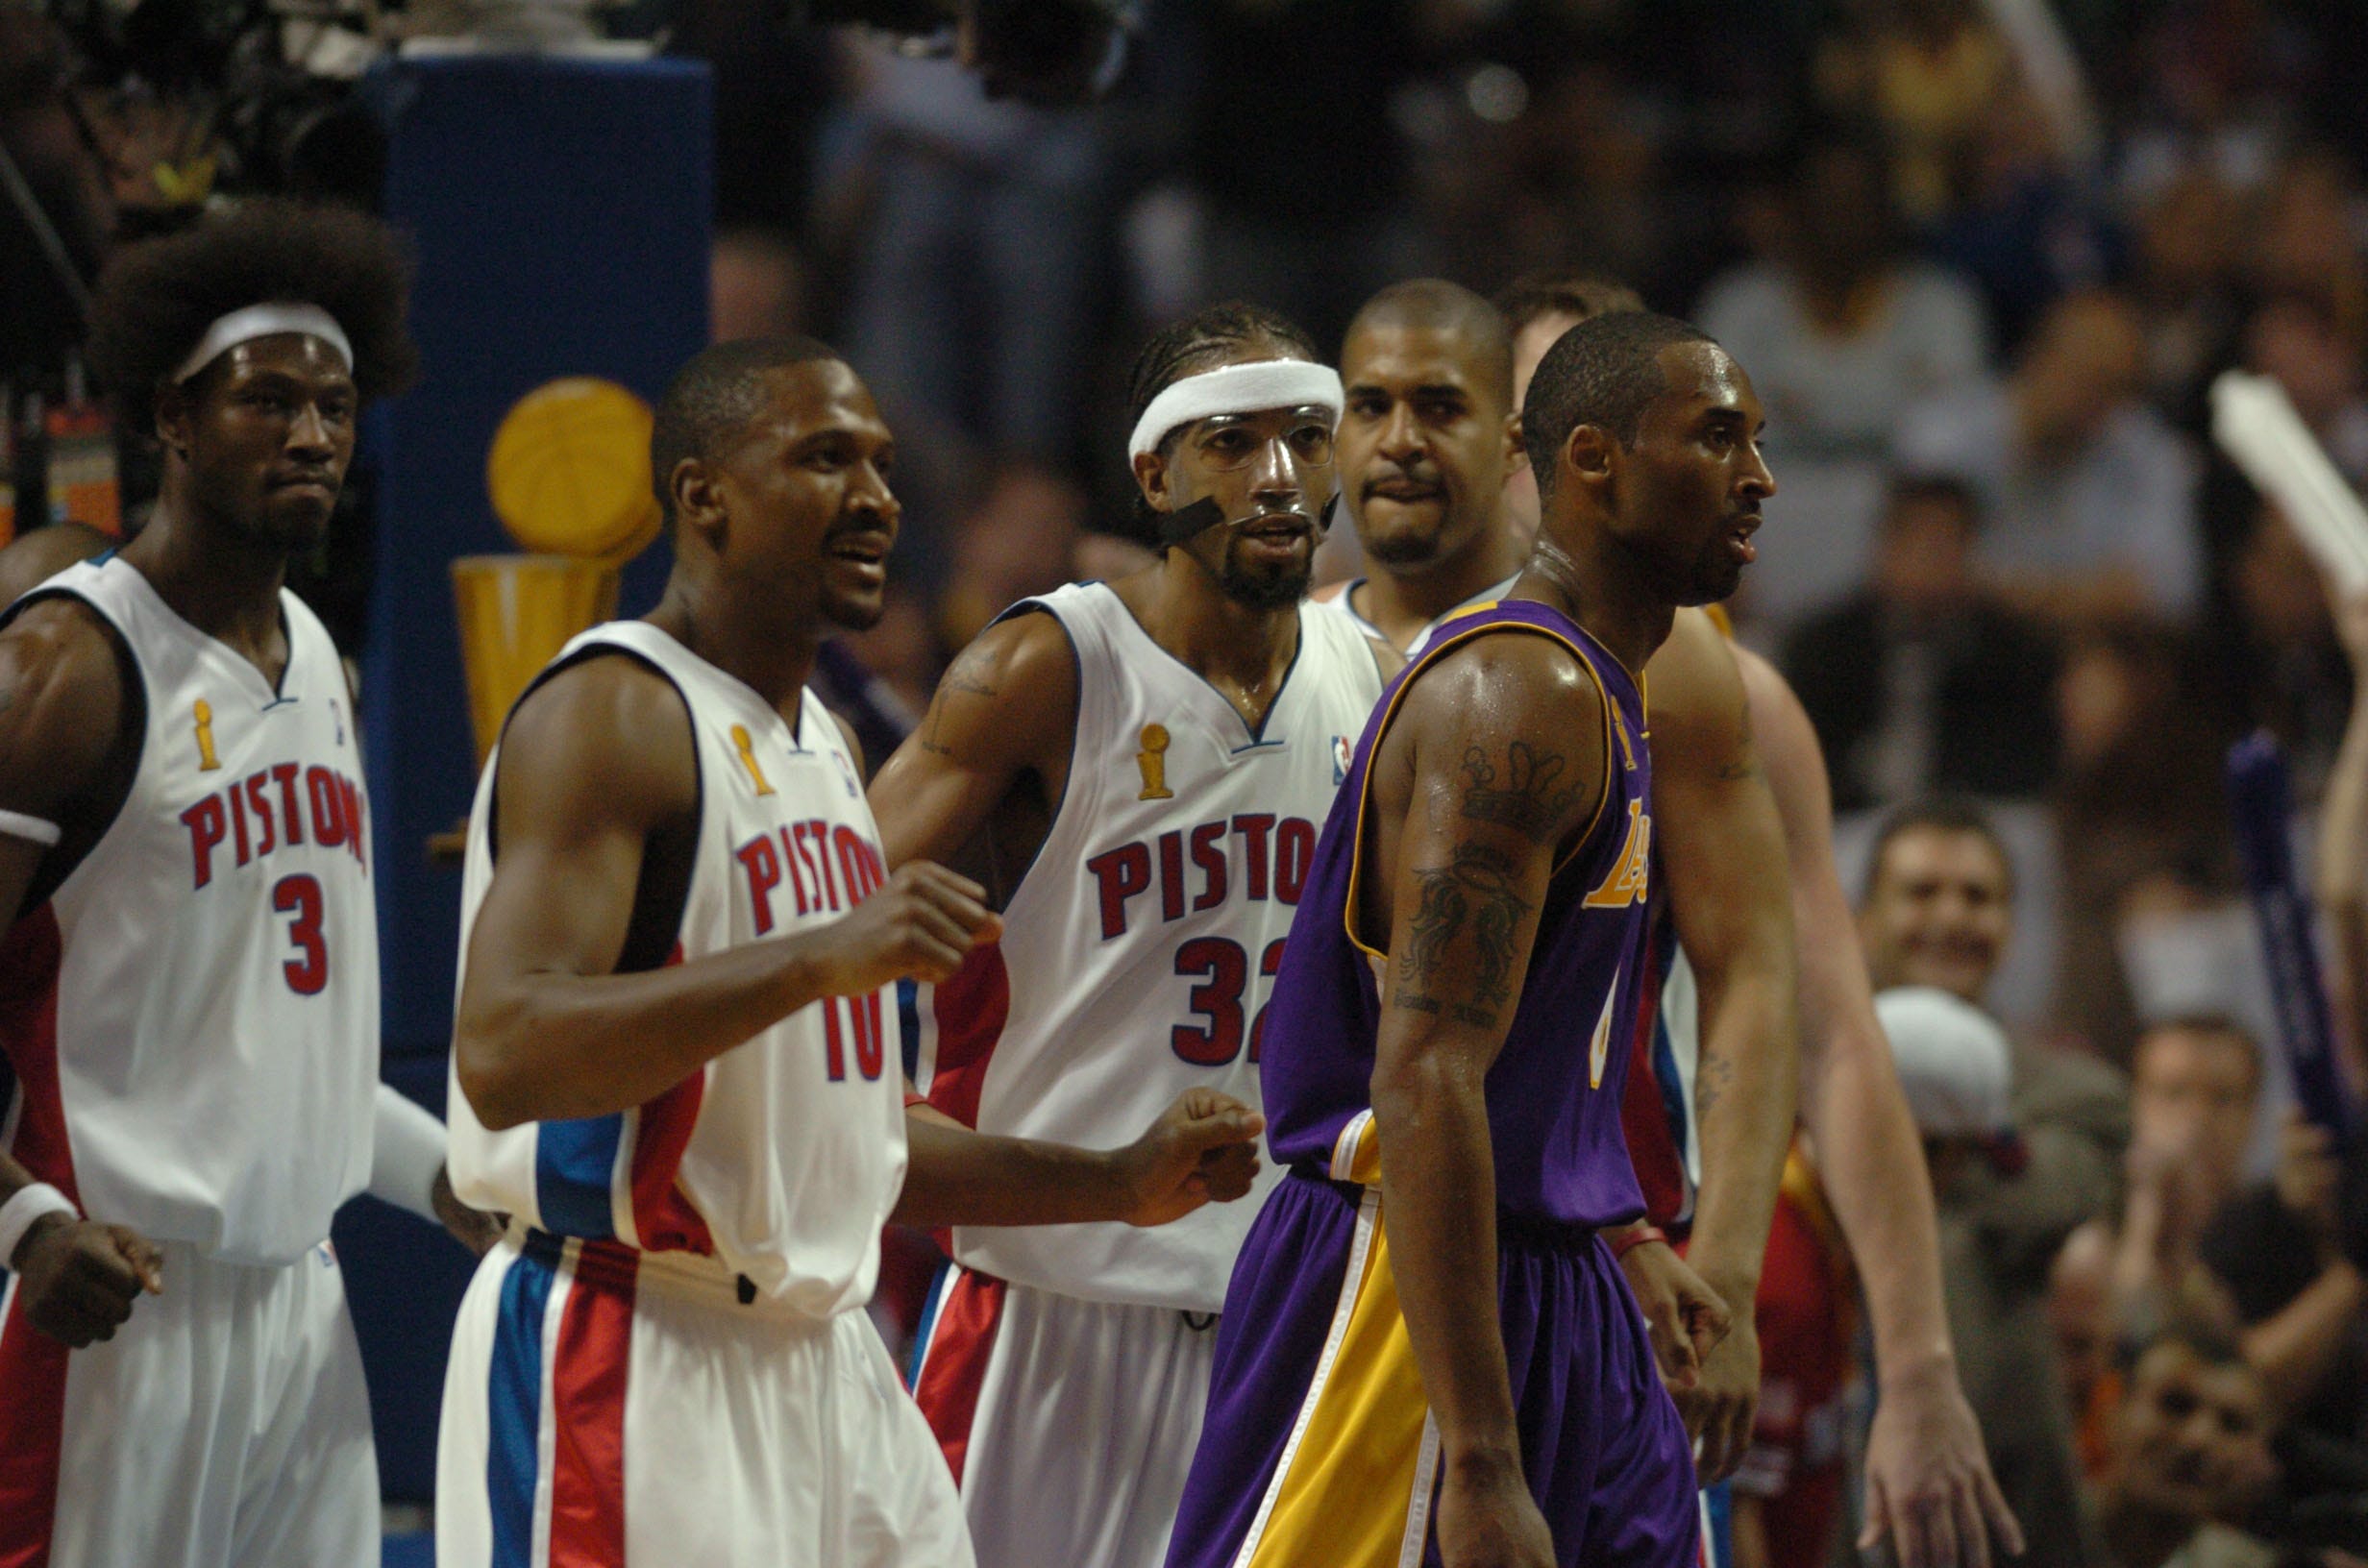 Kobe Bryant in disbelief as he leaves the floor during the NBA Finals against the Pistons in 2004.